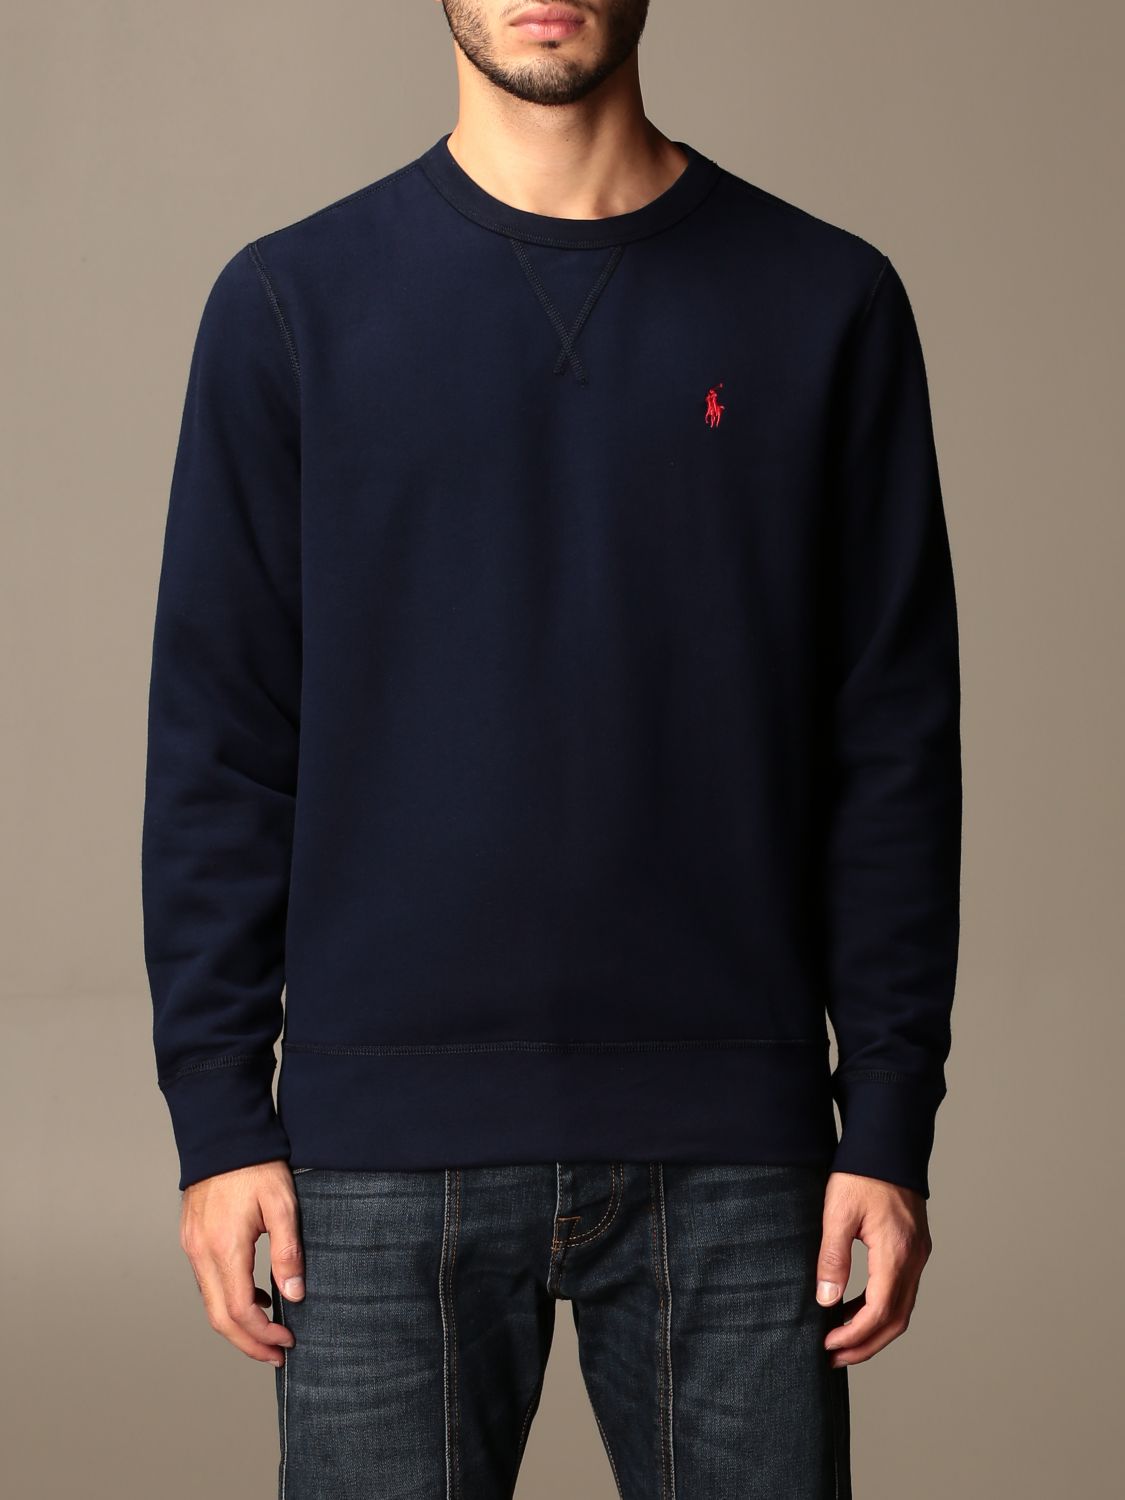 Polo Ralph Lauren Outlet: sweatshirt in washed cotton with logo - Blue